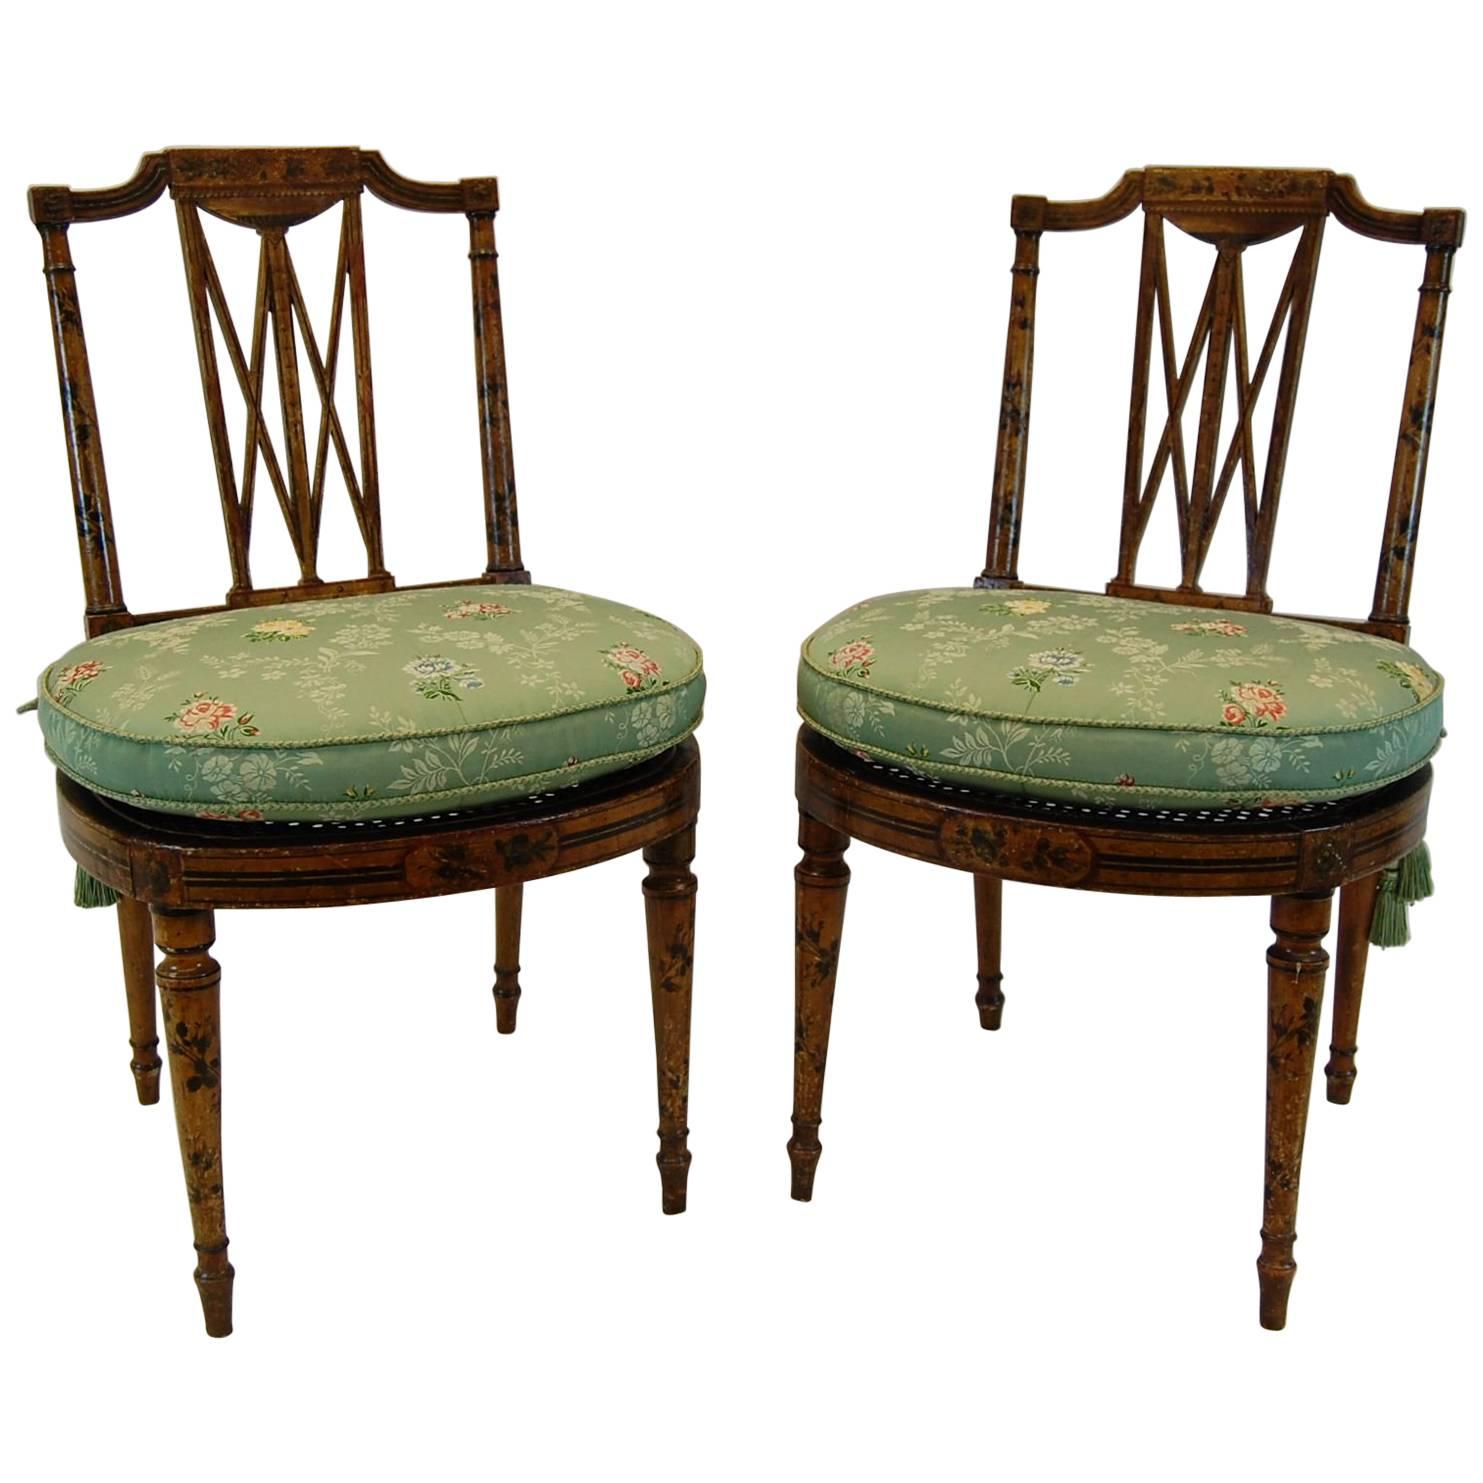 Pair of Early 19th Century English Chairs with Cane Seats, circa 1800